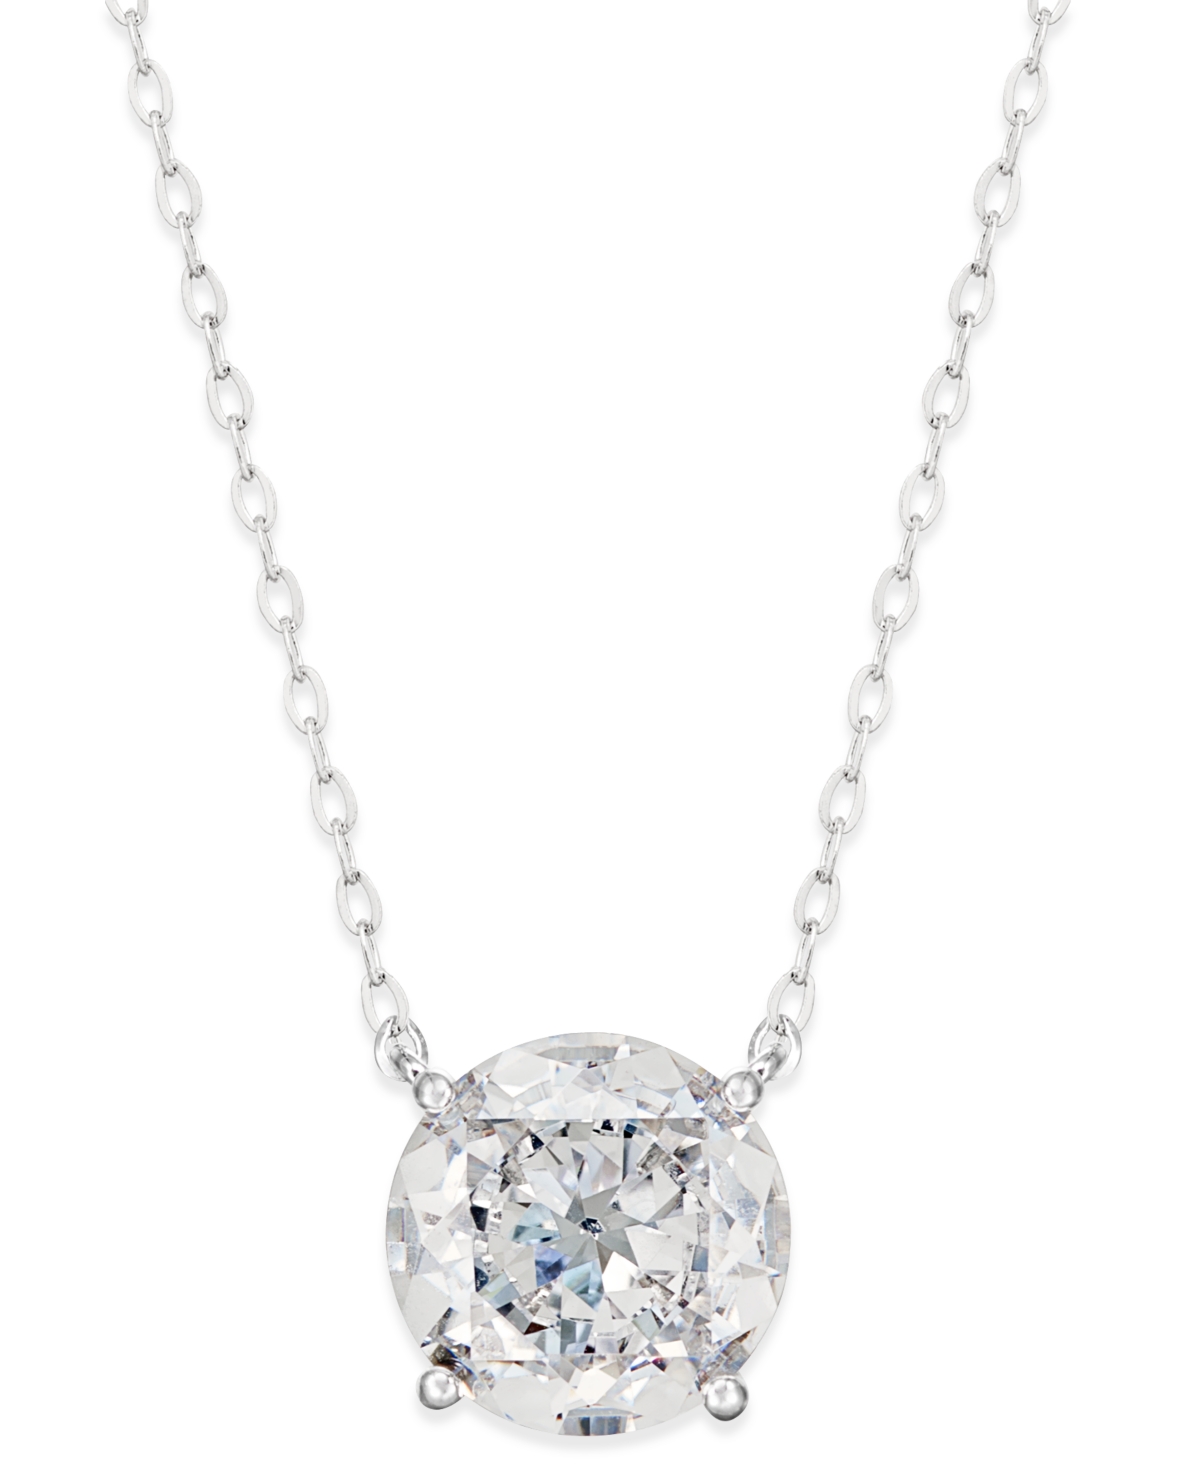 Silver-Tone Crystal Pendant Necklace, Created for Macy's - Silver